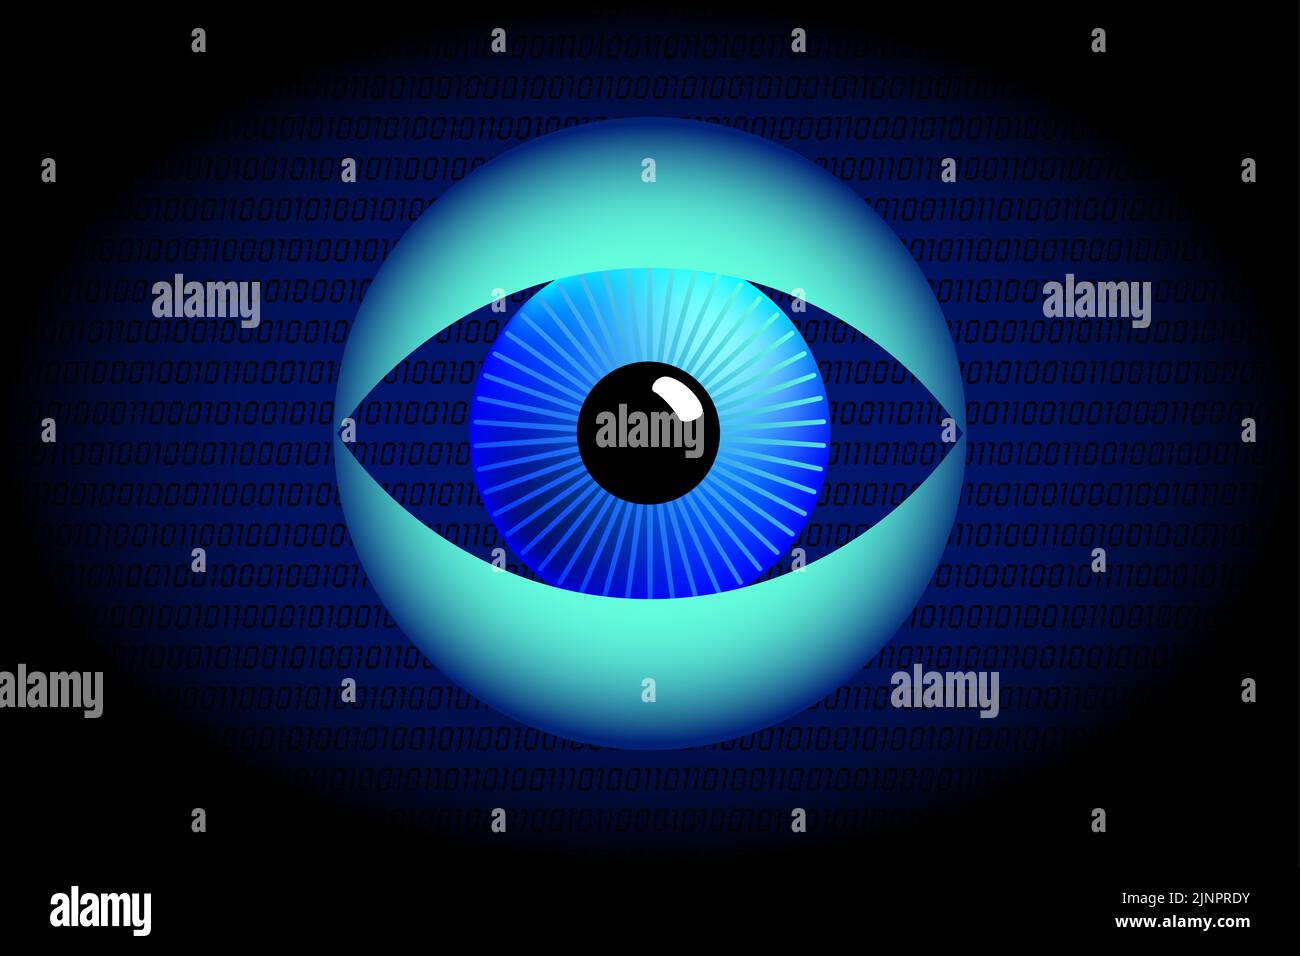 Surveillance eye and Big Data symbol. Blue eyeball between wide open spread turquoise eyelids, in front of a dark blue background. Stock Photo